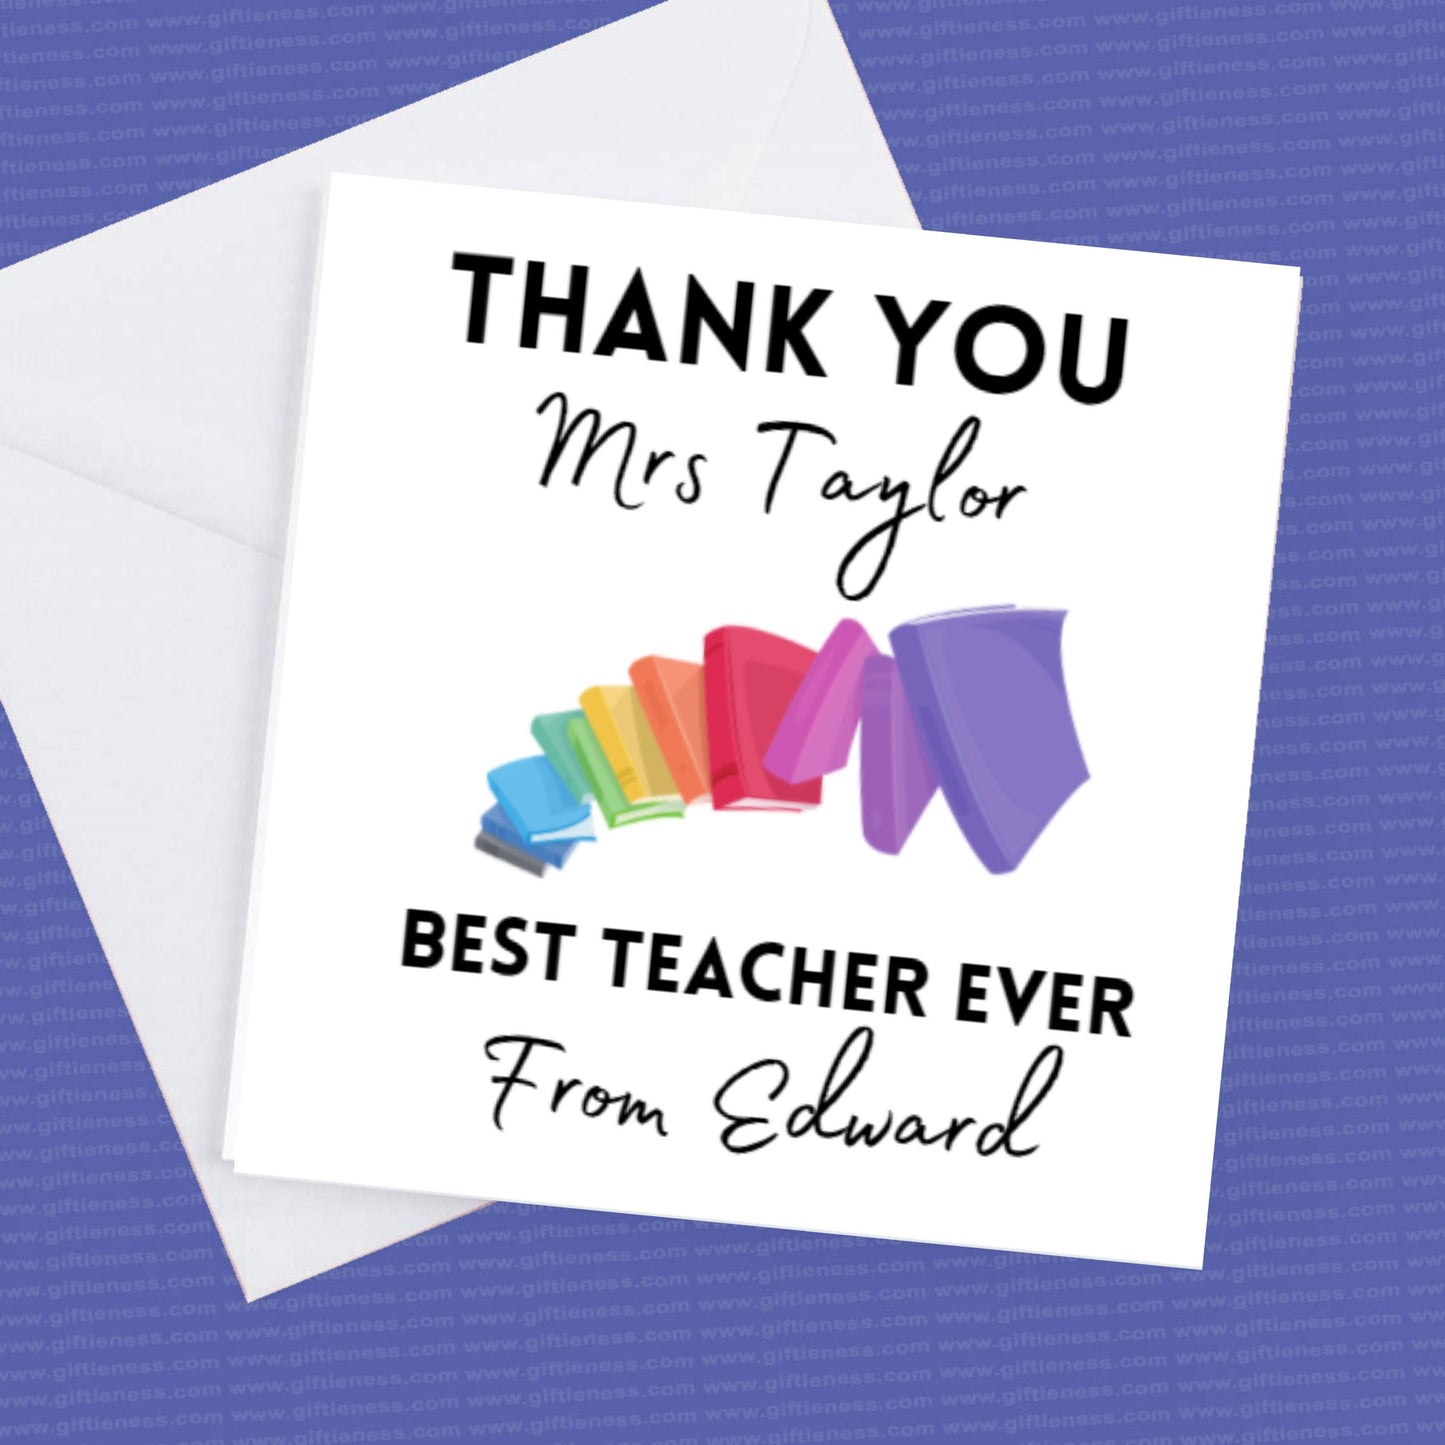 Personalised Thank you Teacher 'Best Teacher Ever' Card and envelope